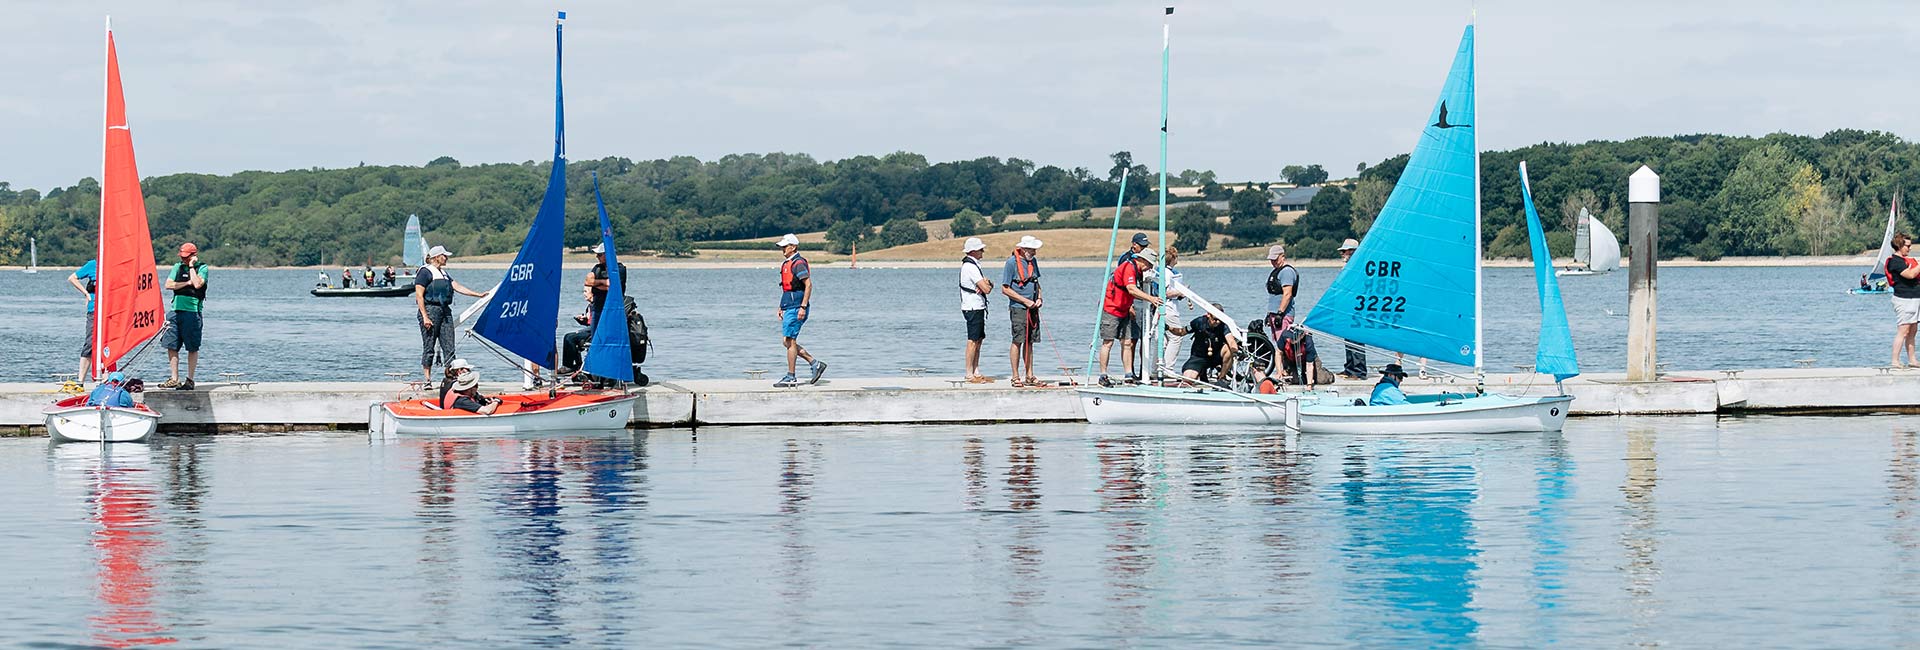 wide shot of people being helped into dinghies by other people at a dock on a lake